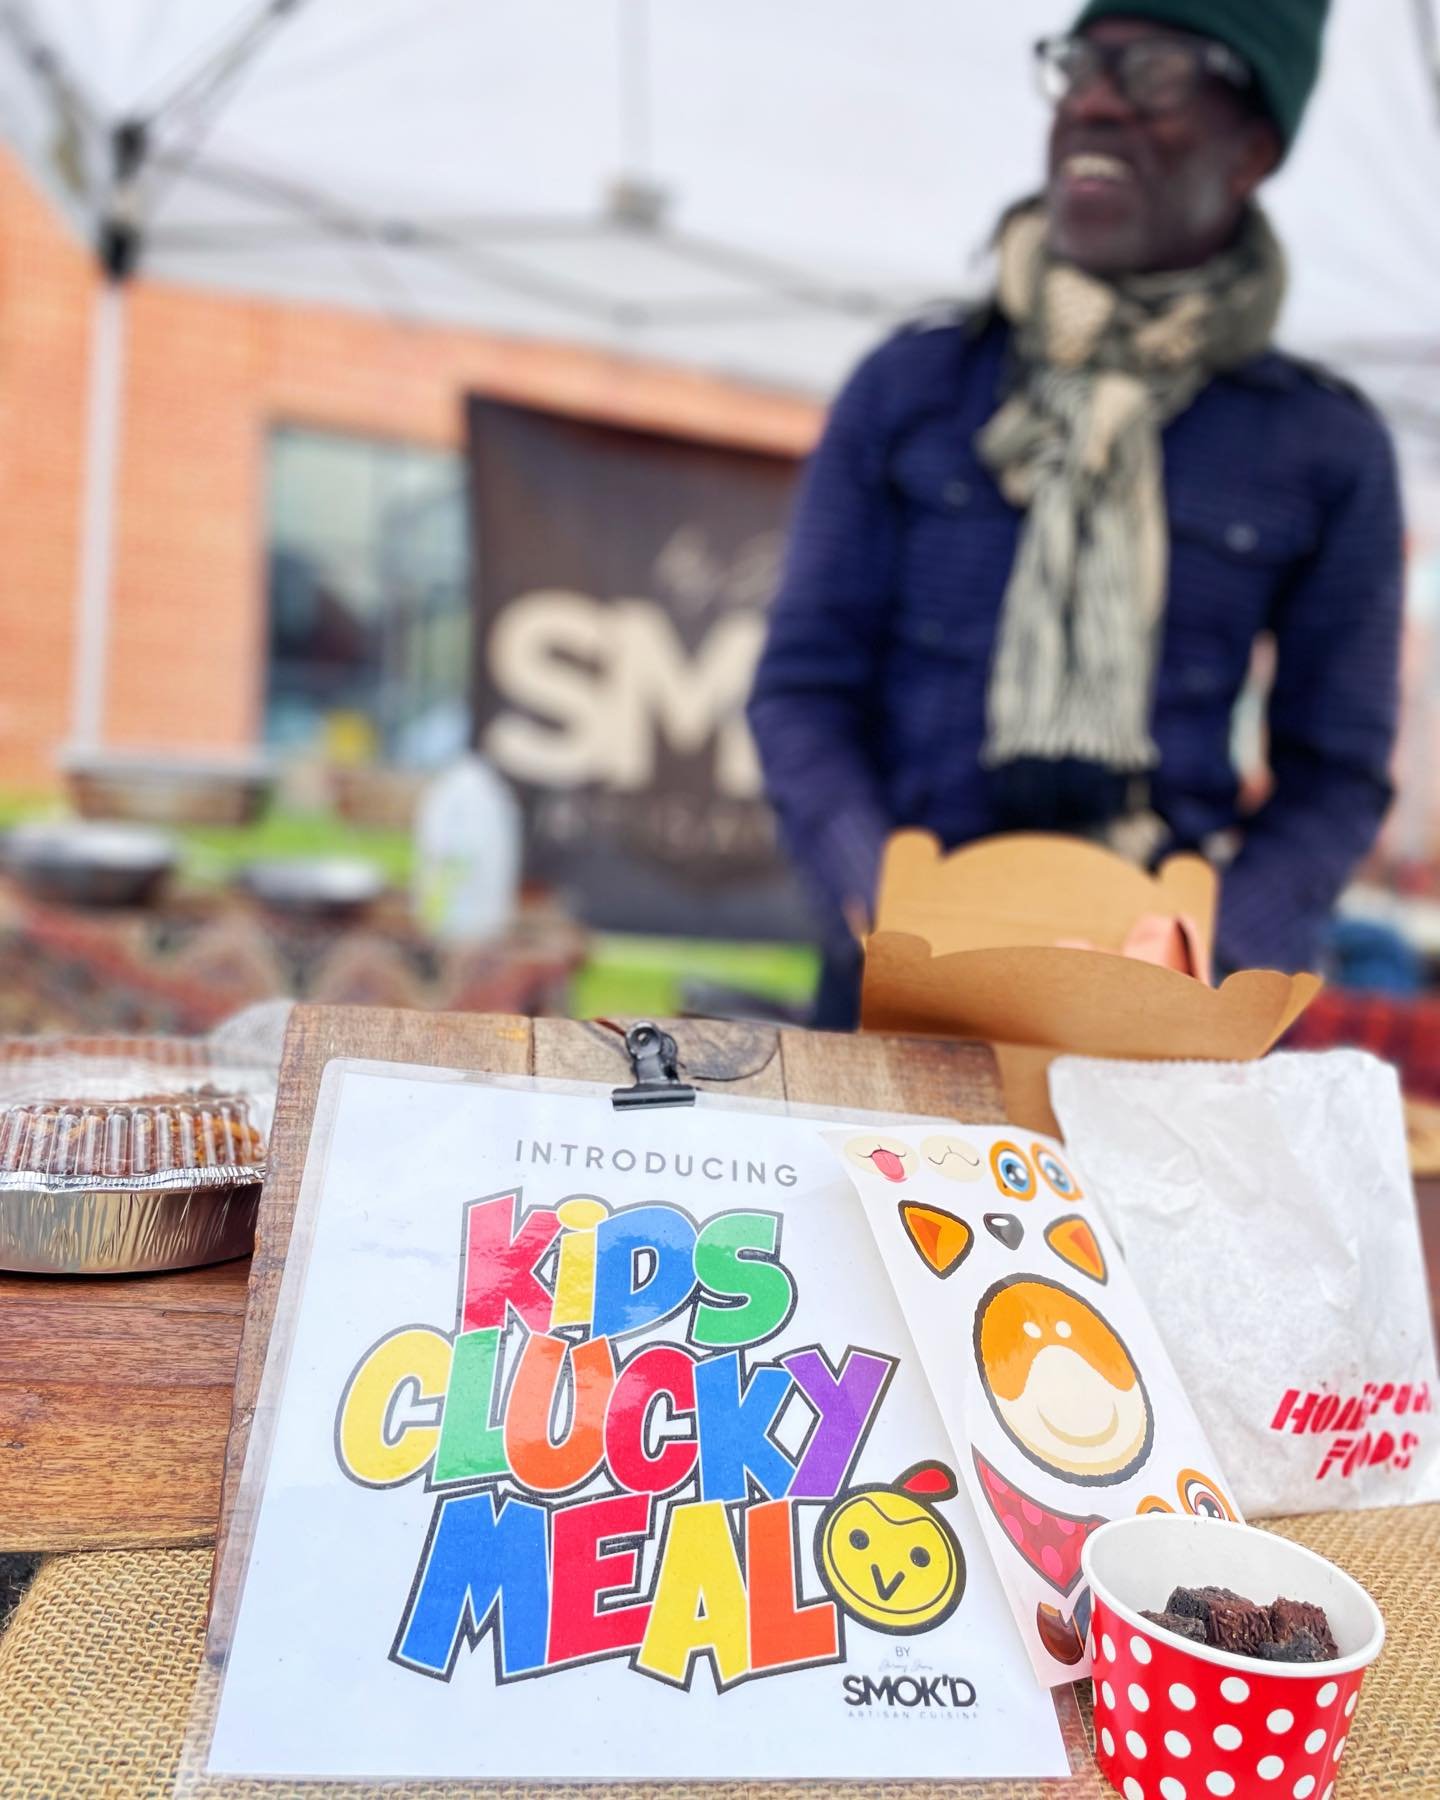 Debuting at the @beaconfarmersmarket ❤️ happy little lunches for the little ones. Savory meats, mac + cheese, a cookie, stickers. Check &lsquo;em out @smokdchicken 

Every Sunday. 10-2. @beaconfarmersmarket Voted BEST FARMERS&rsquo; MARKET by @hudson